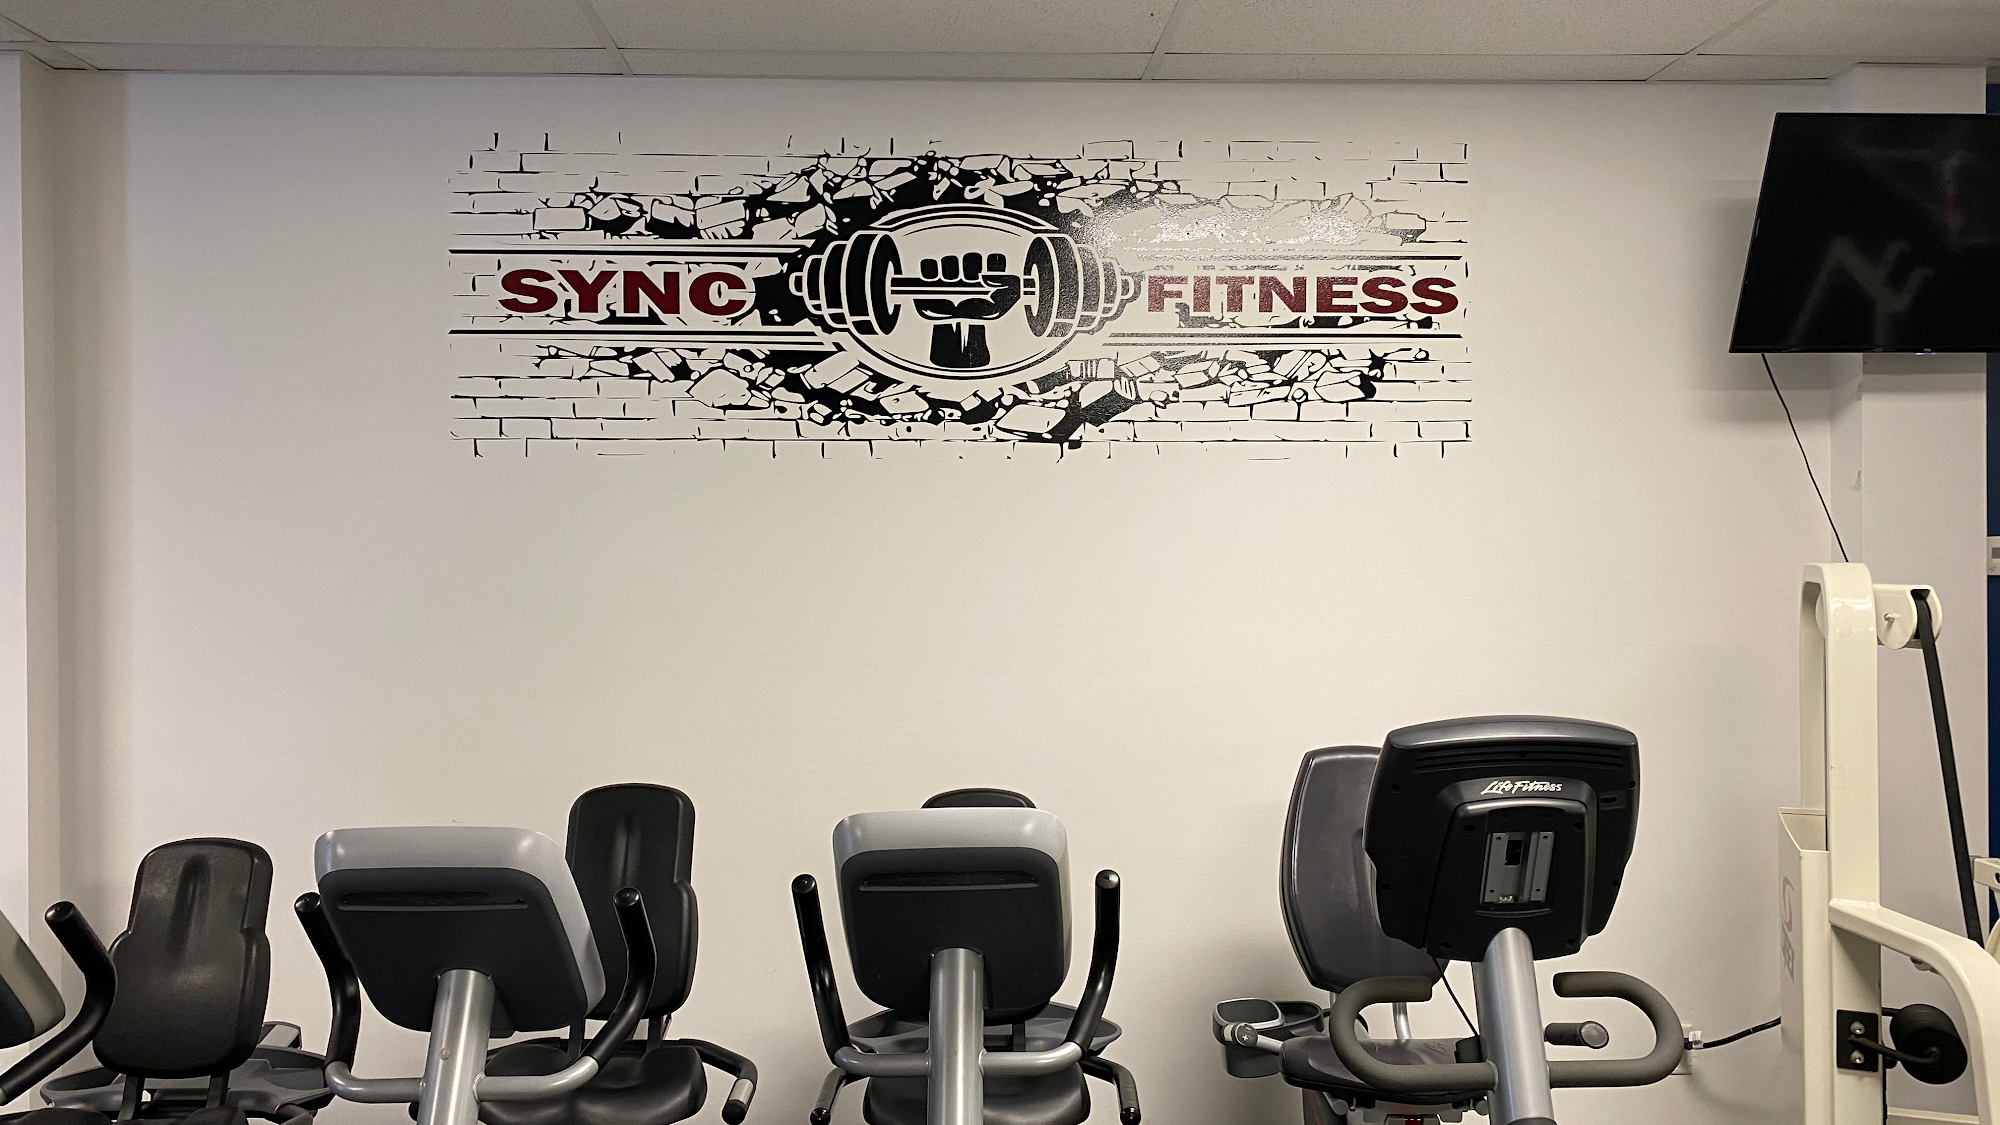 Sync Health and Fitness